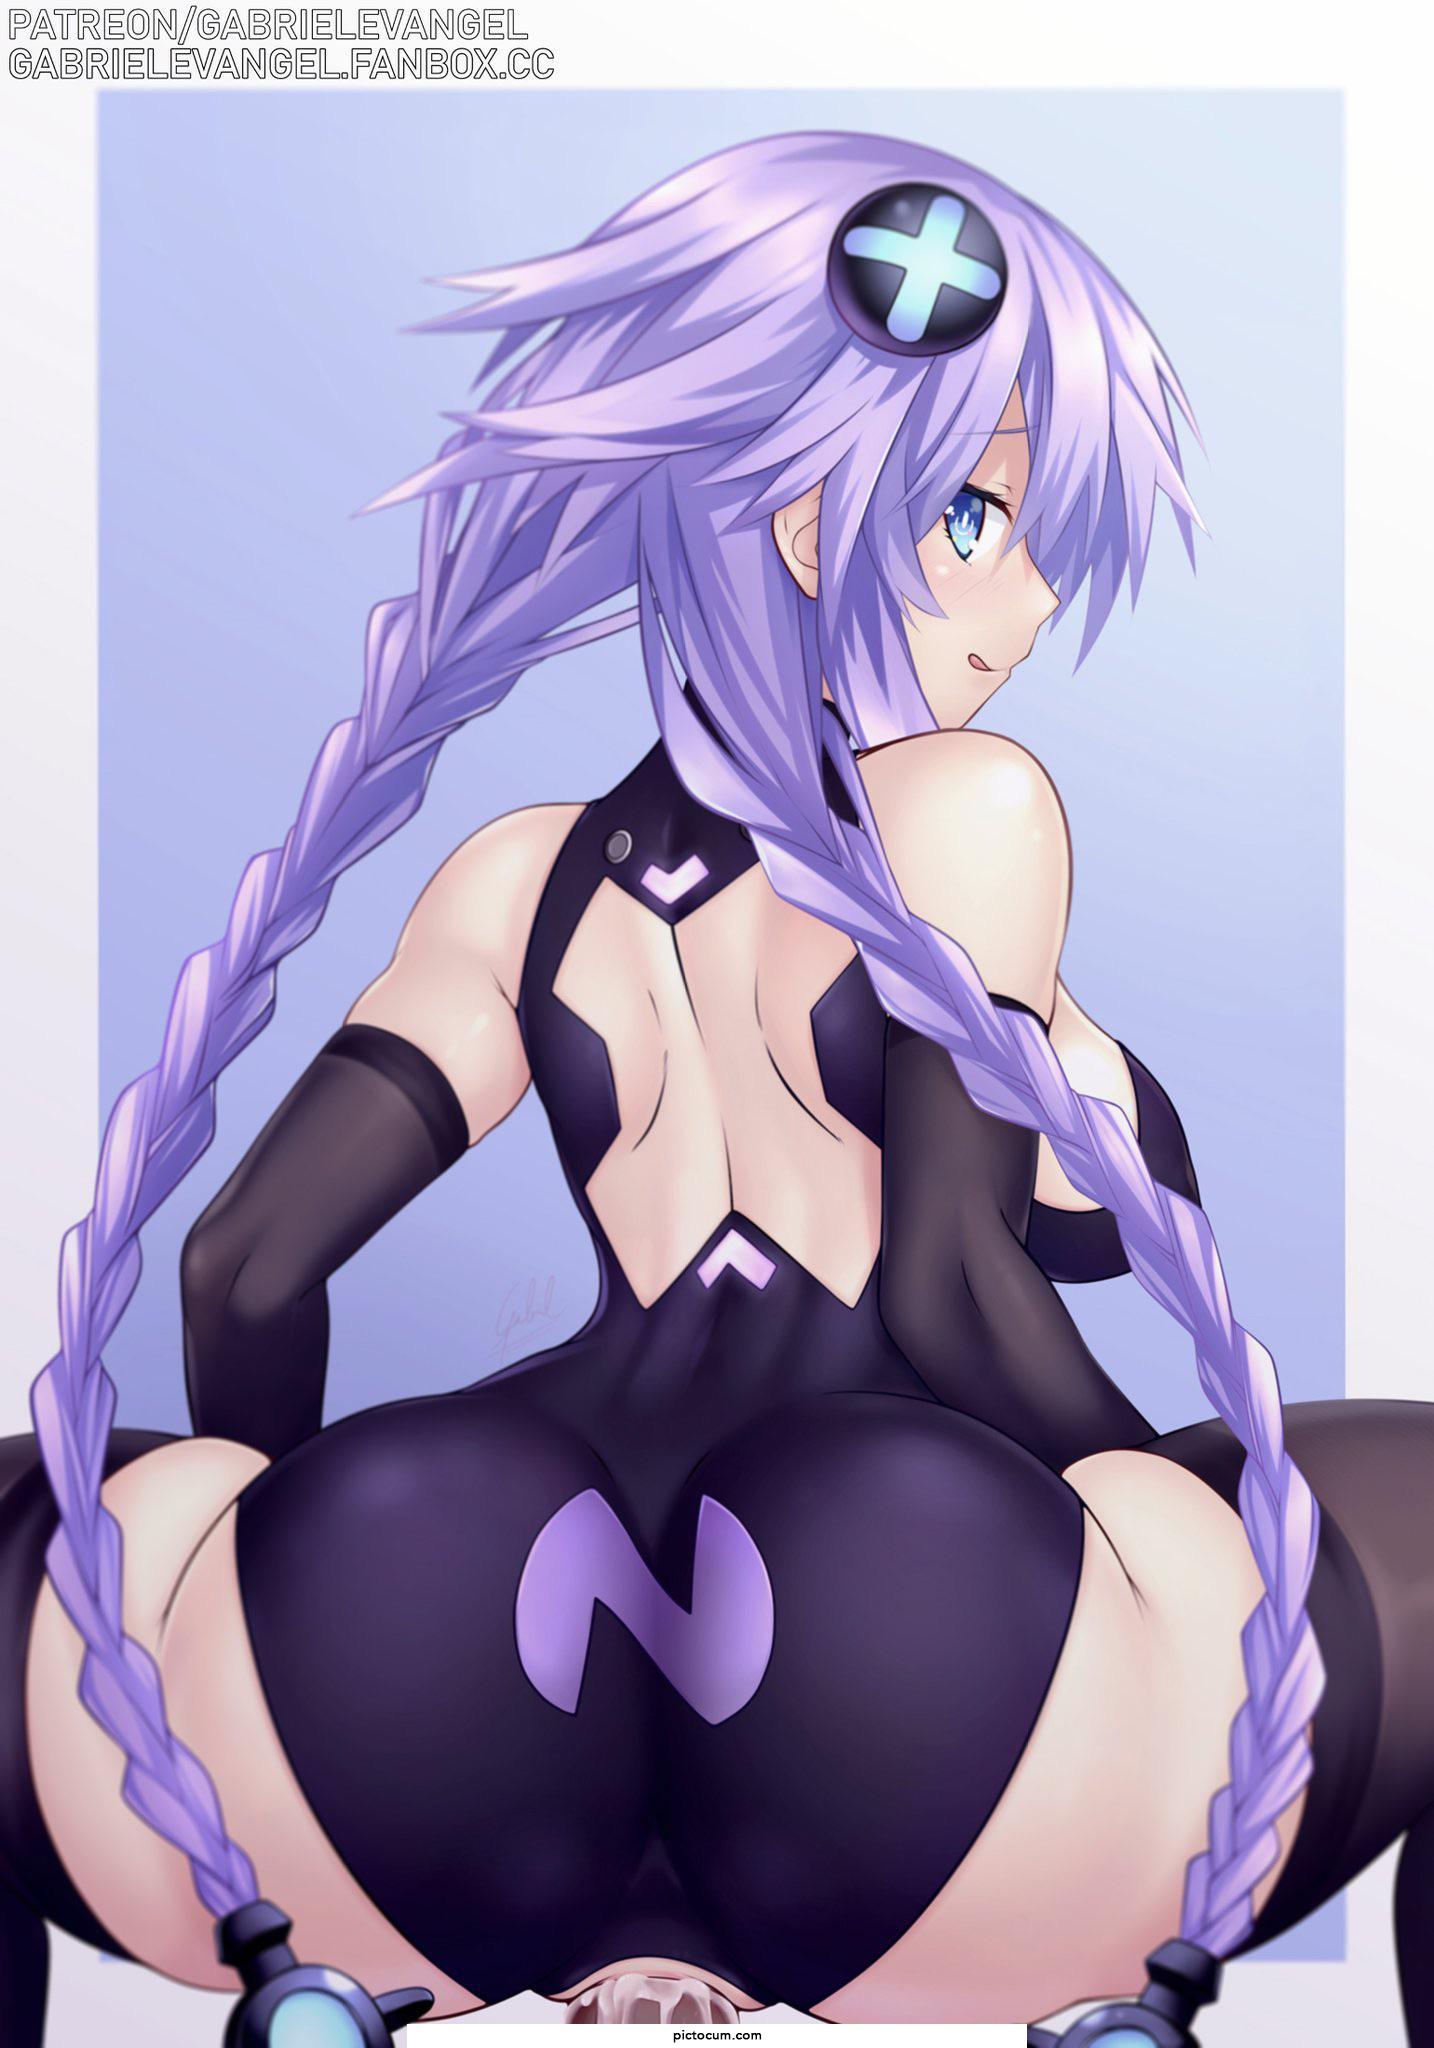 Purple Heart requires more followers, so she knows just how to do it!